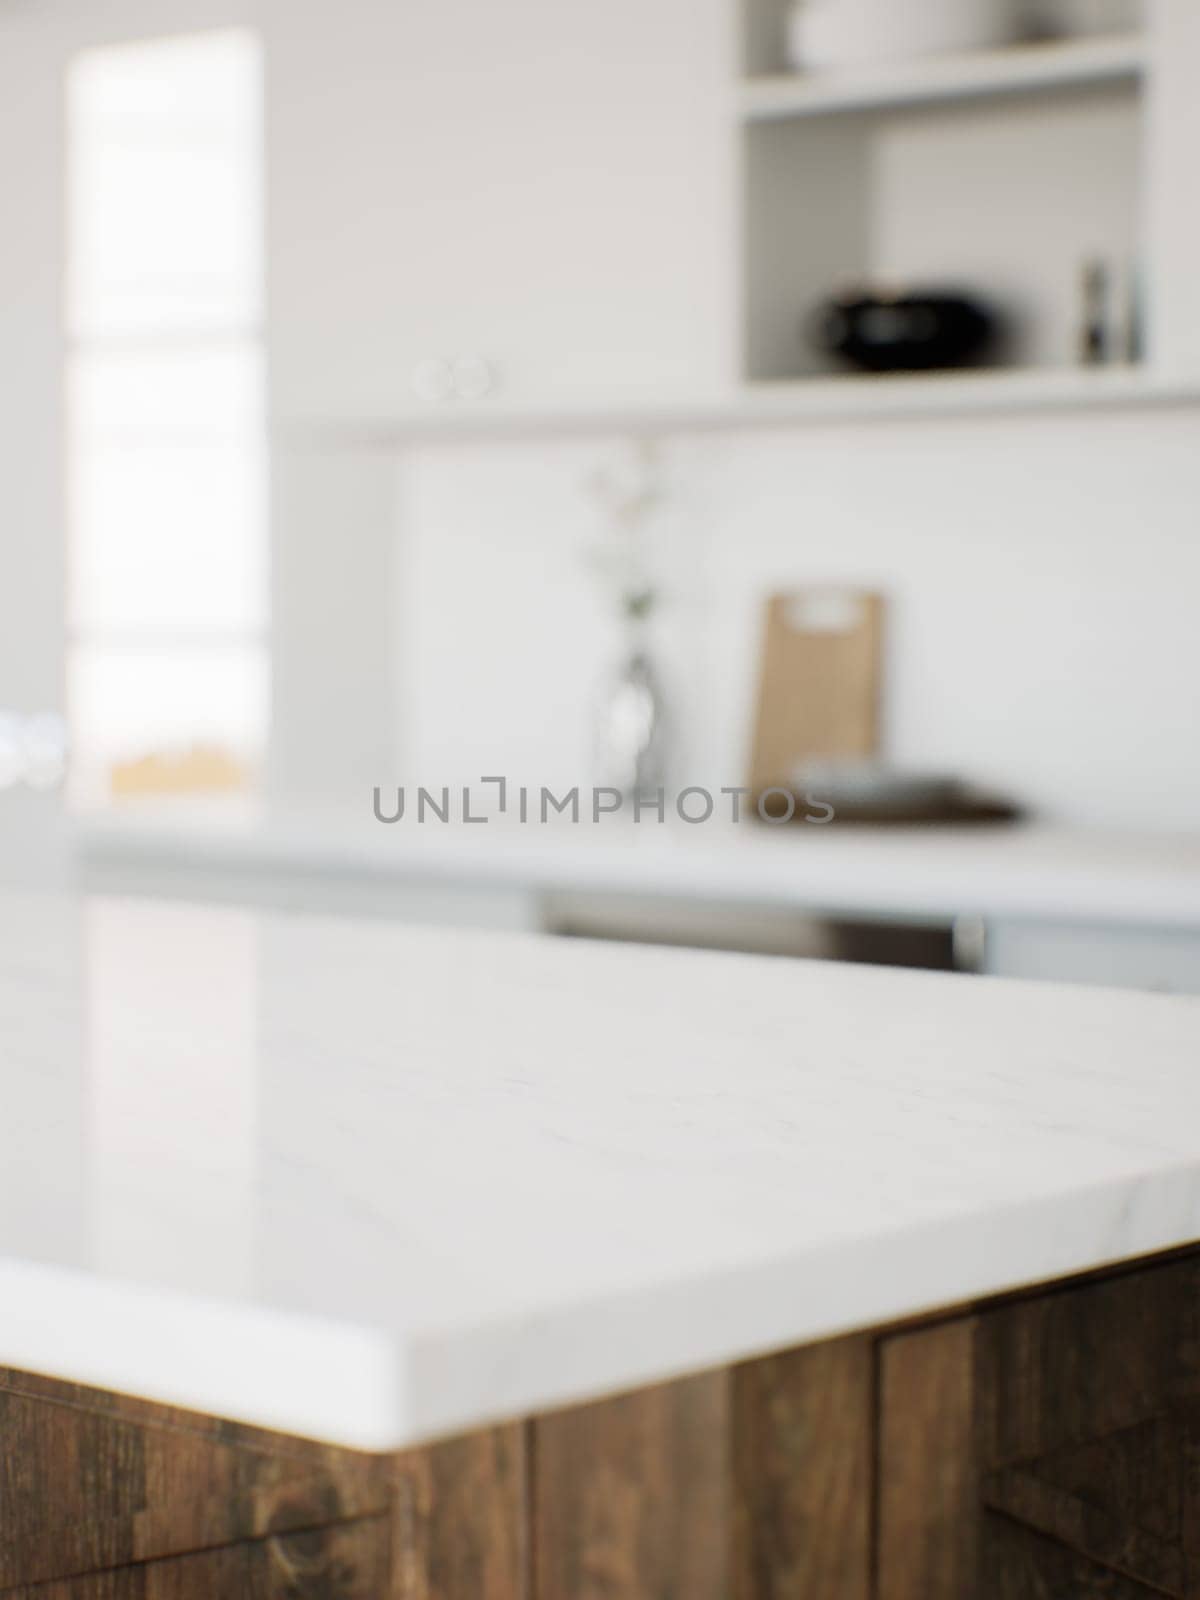 Focus on the marble countertop against the backdrop of kitchen appliances and utensils. by N_Design